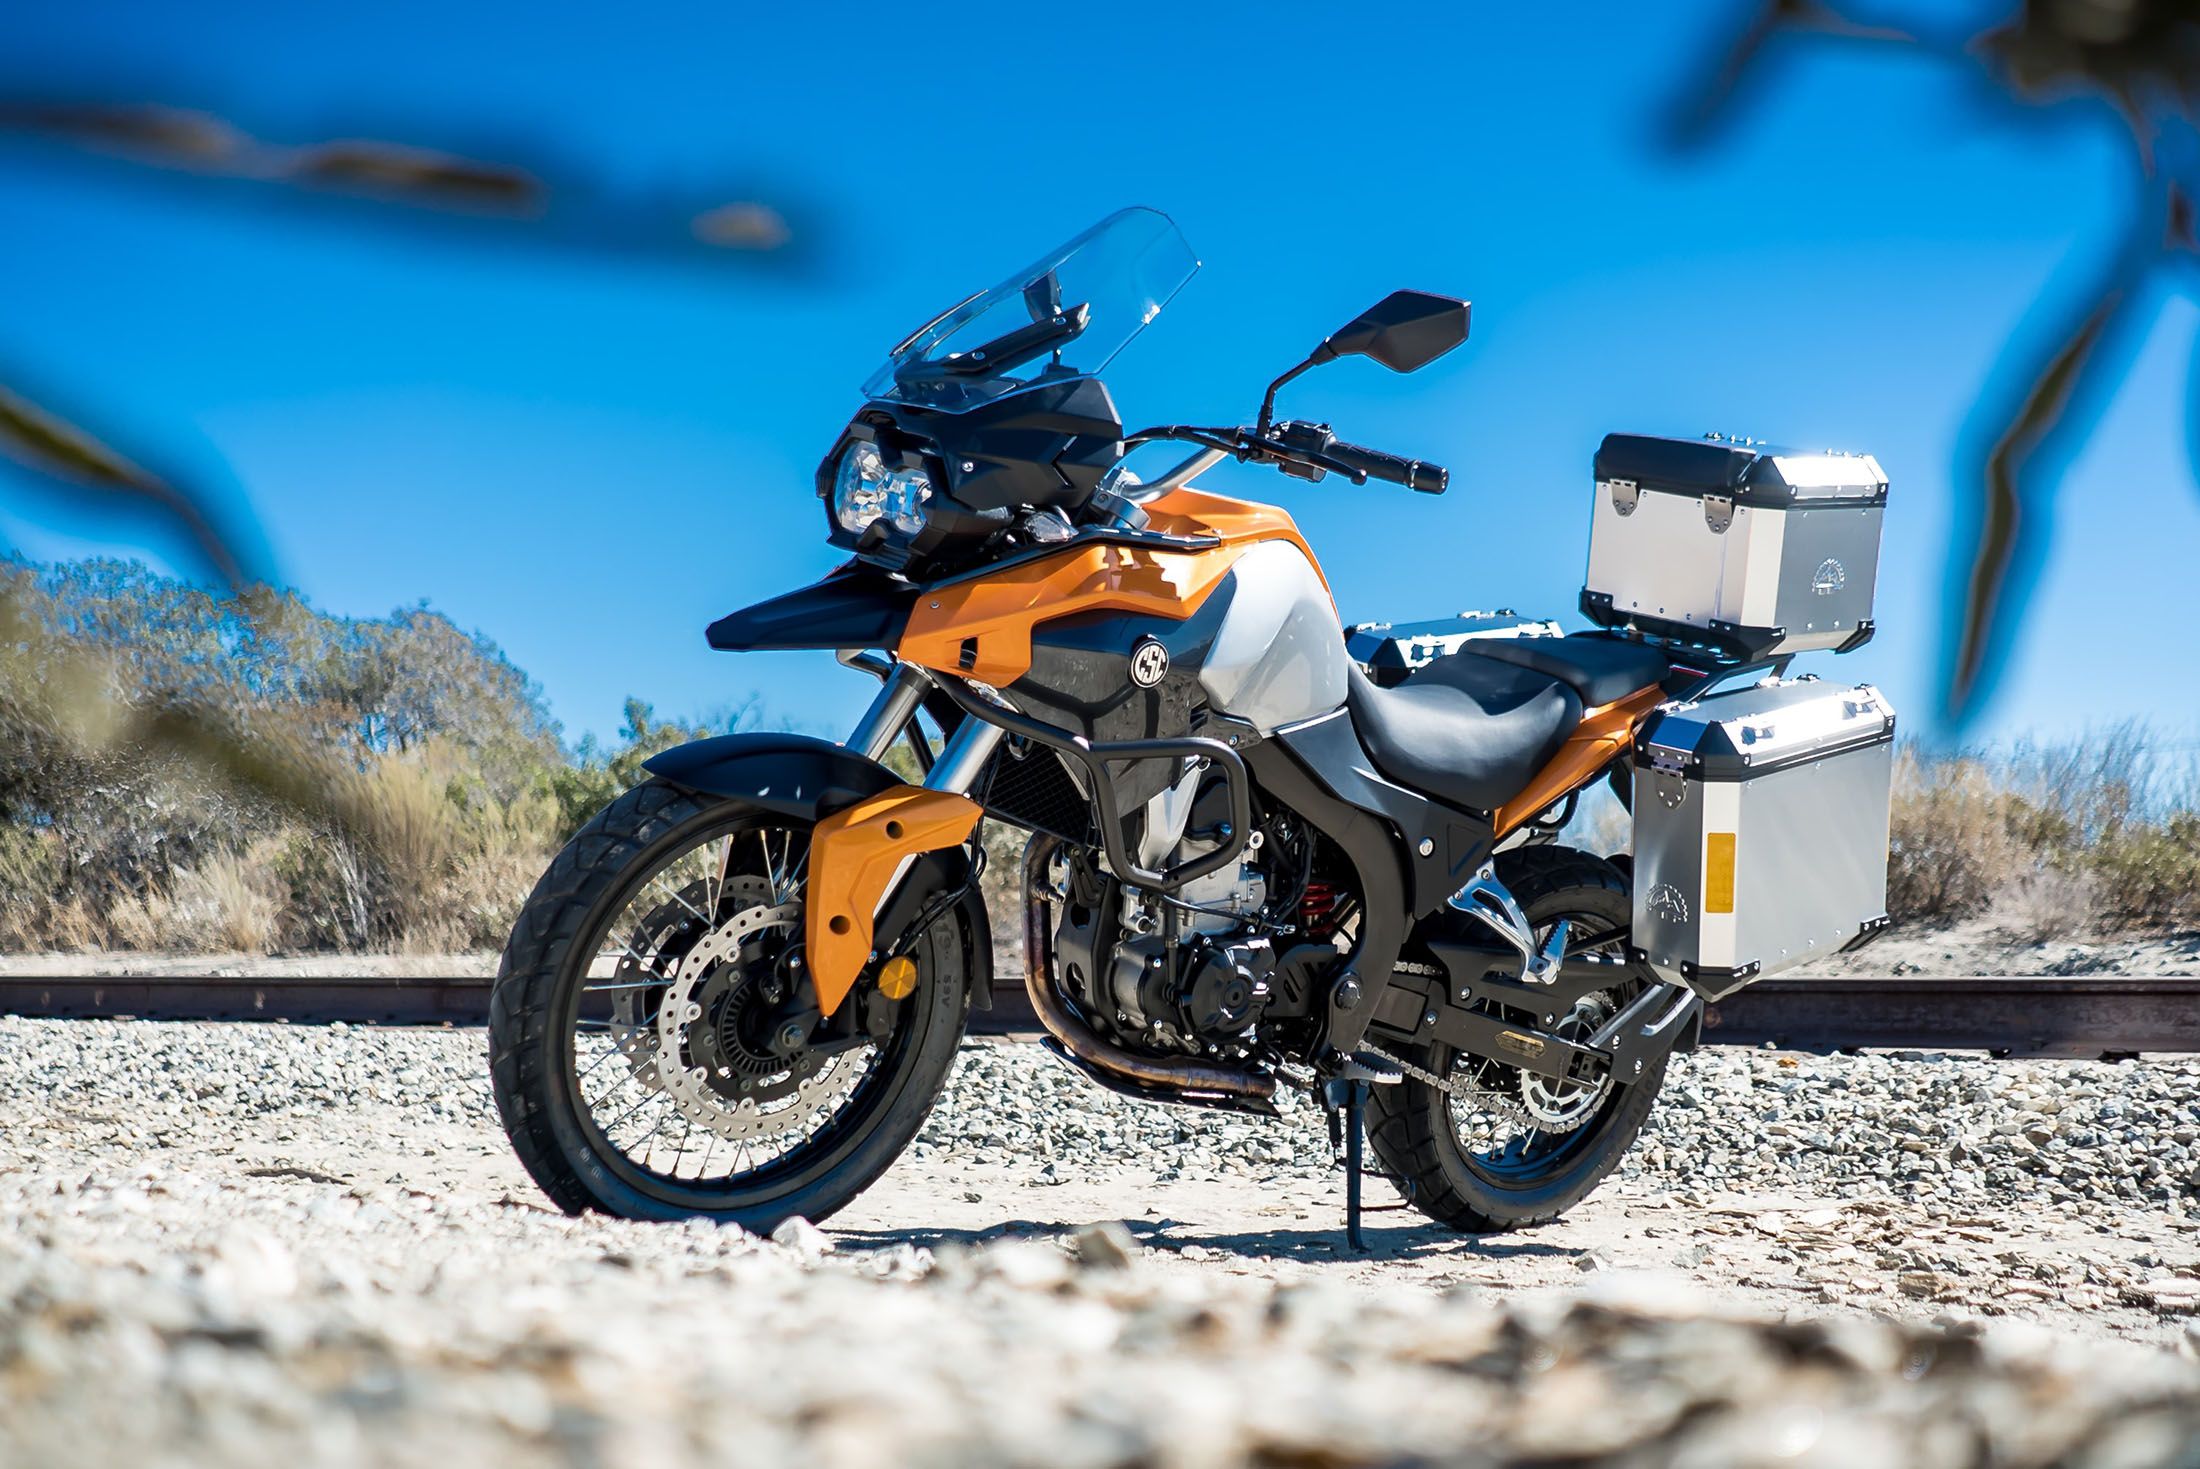 CSC Motorcycles Announces 2020 RX4 Adventure Motorcycle Your